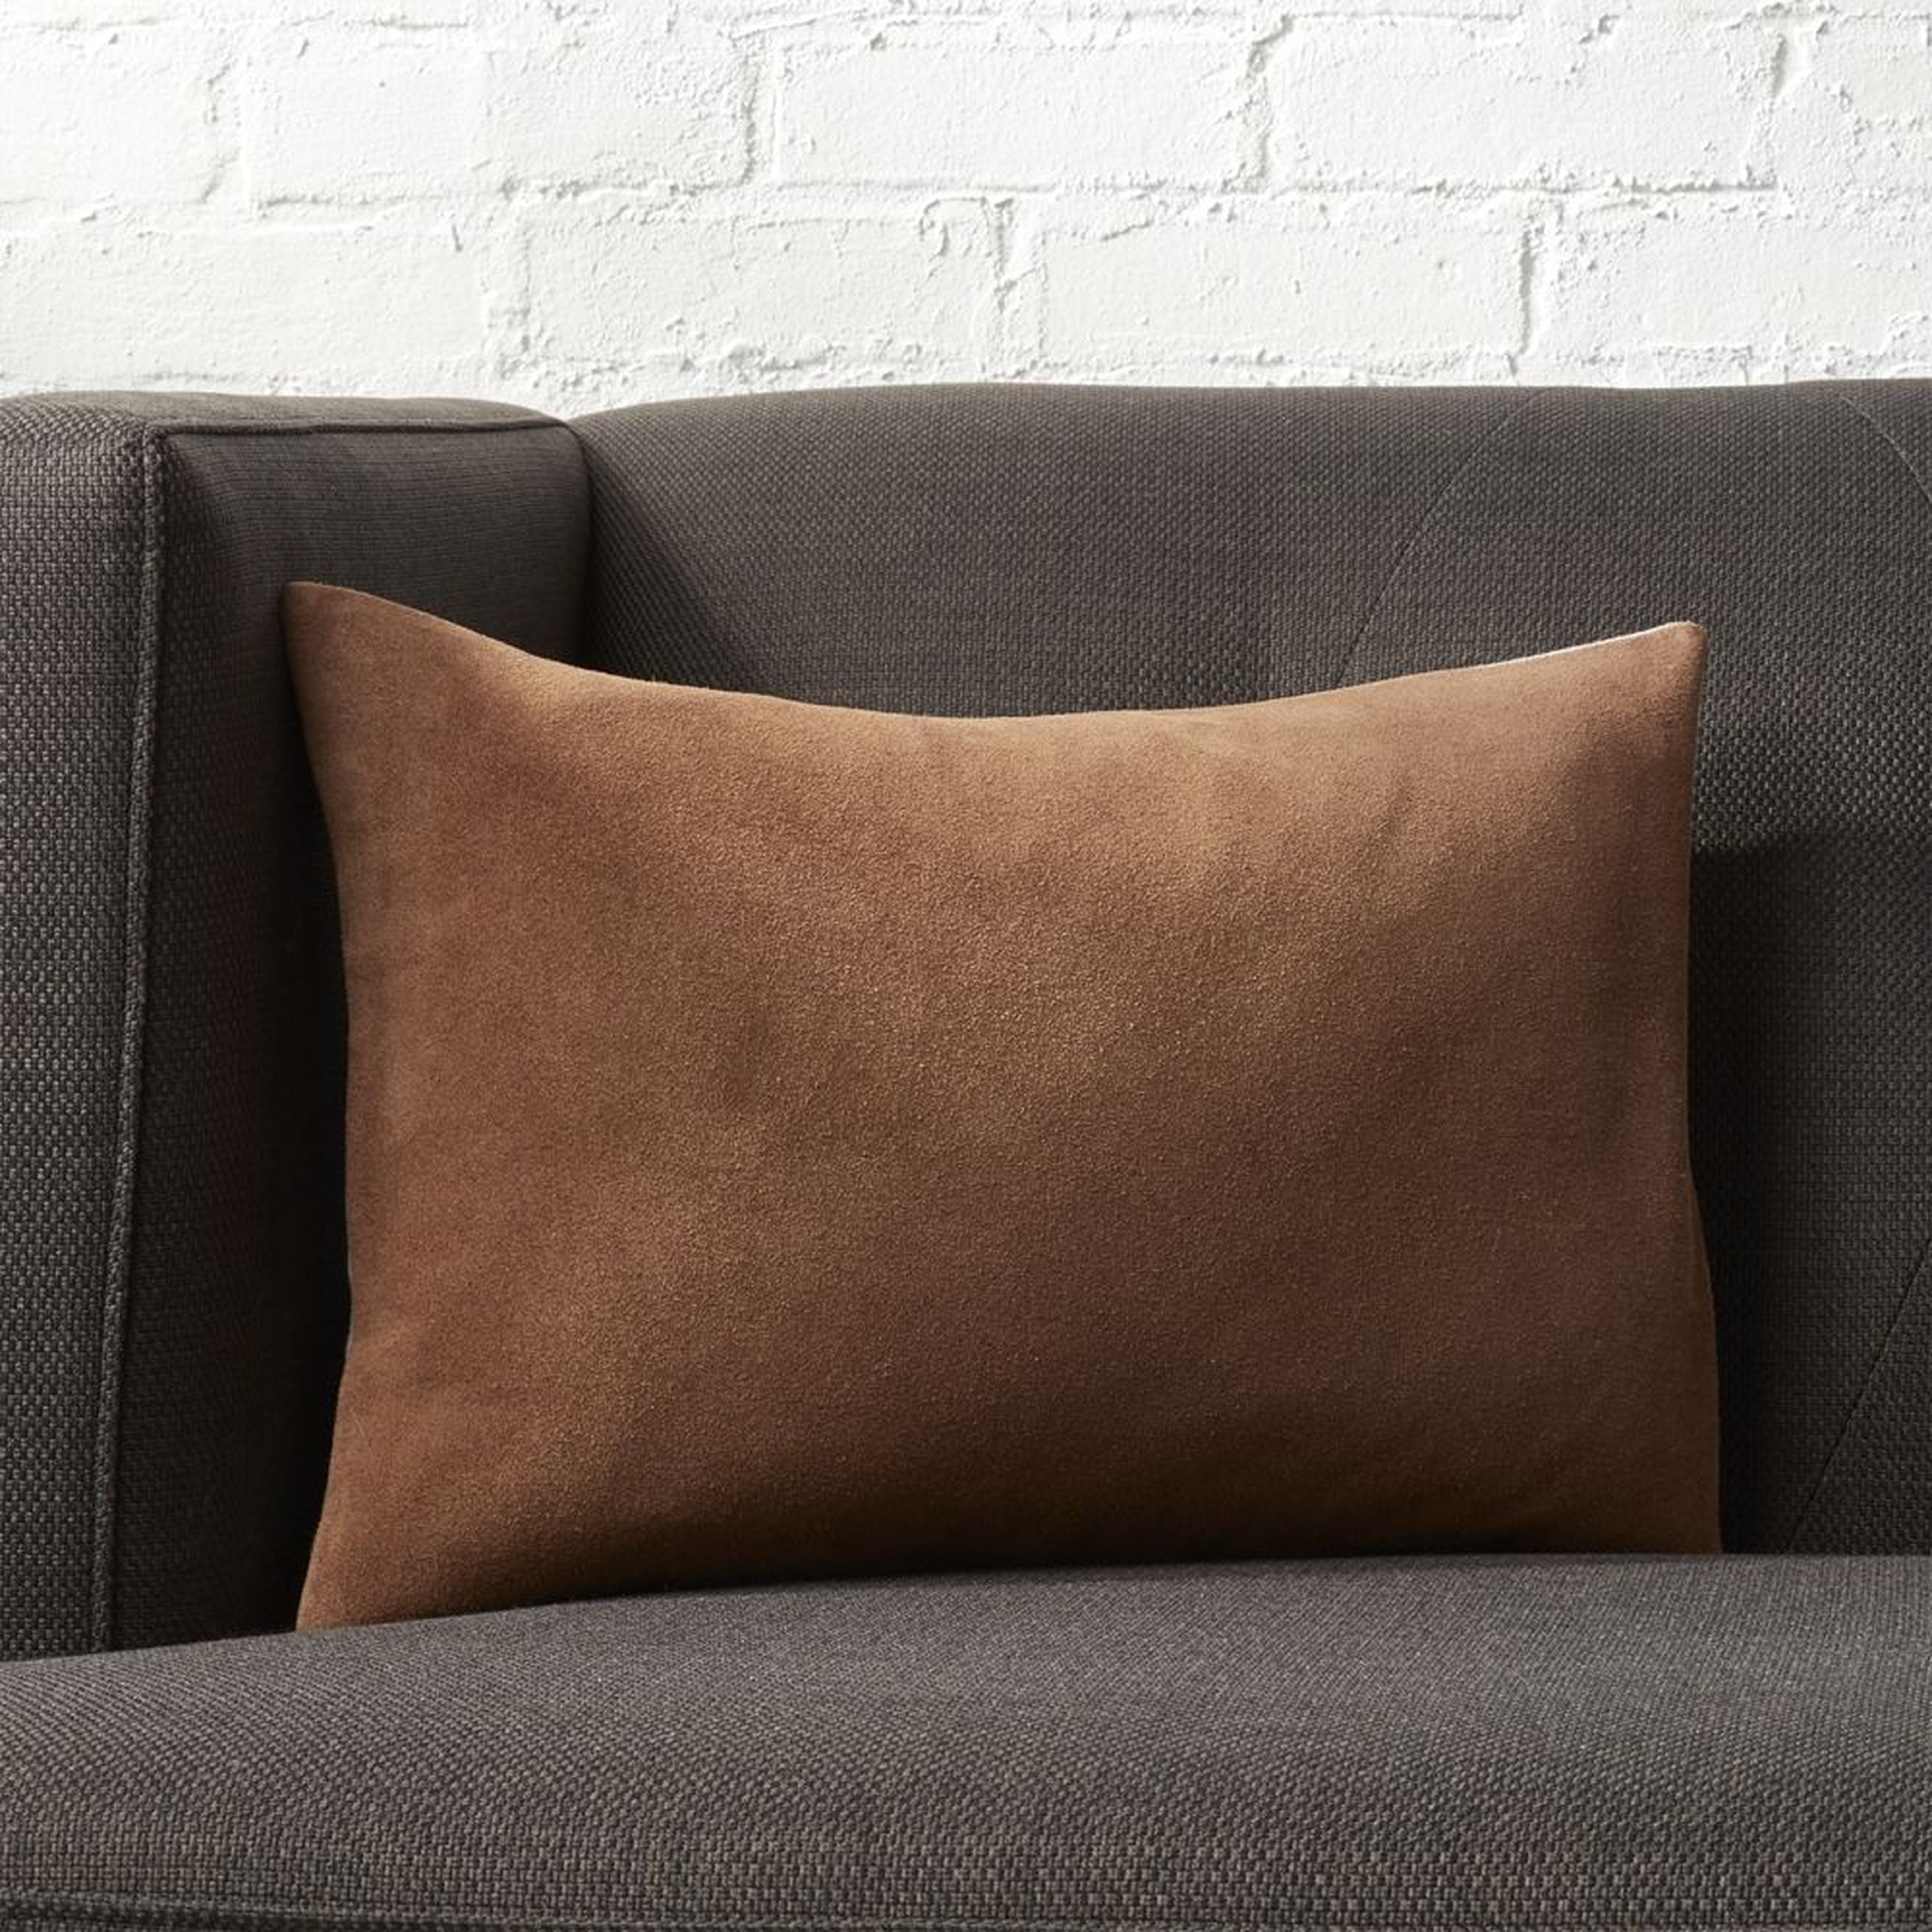 "18""x12"" Loki Brown Suede Pillow with Feather-Down Insert." - CB2